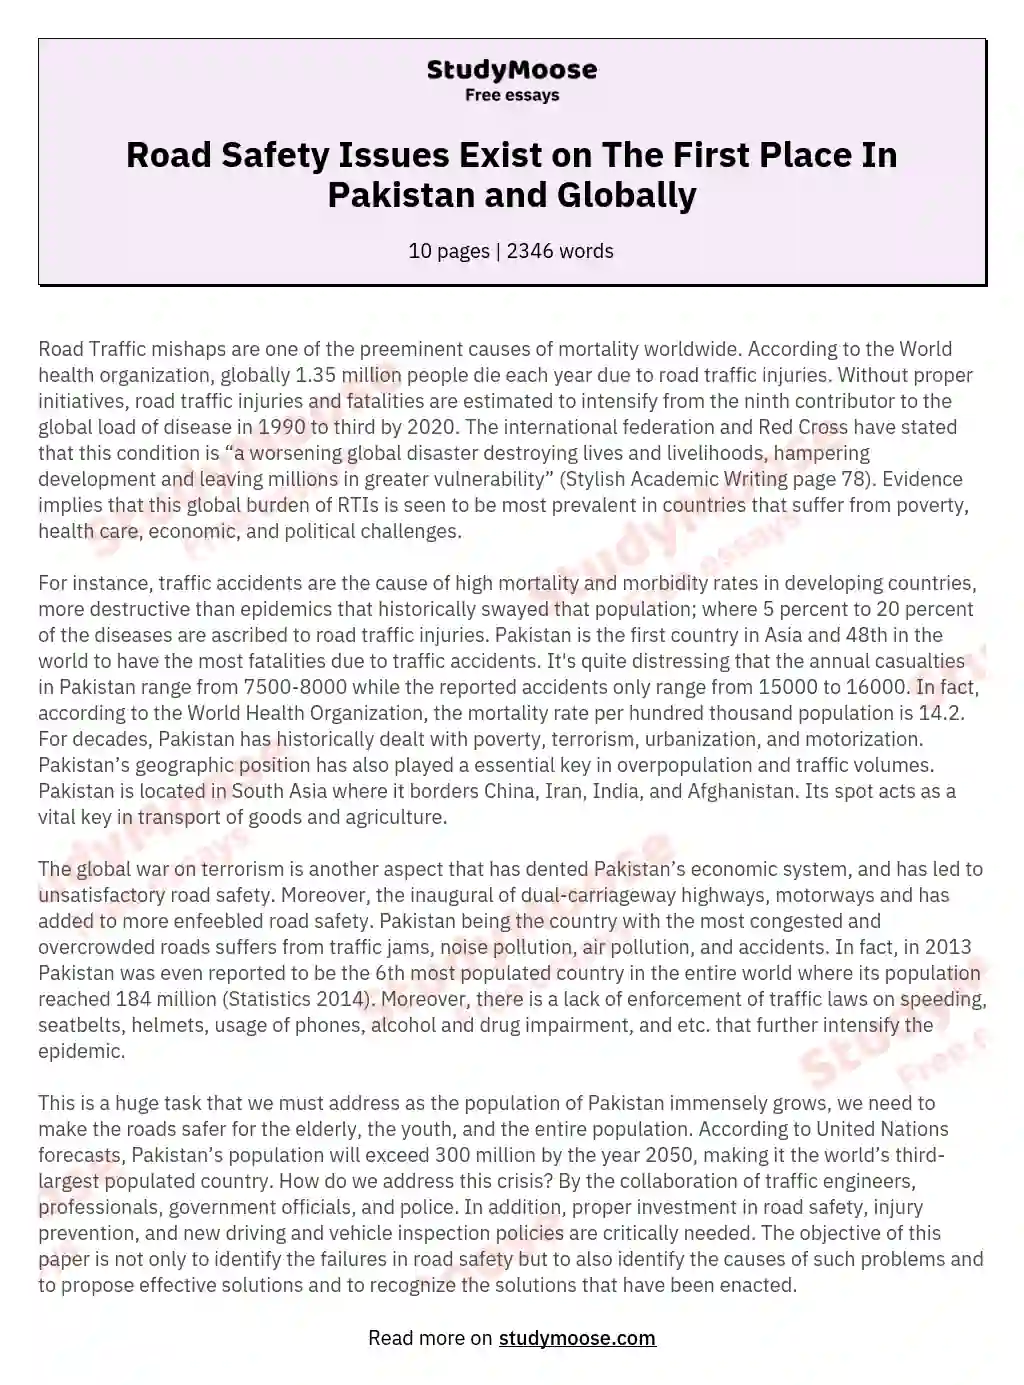 Road Safety Issues Exist on The First Place In Pakistan and Globally essay